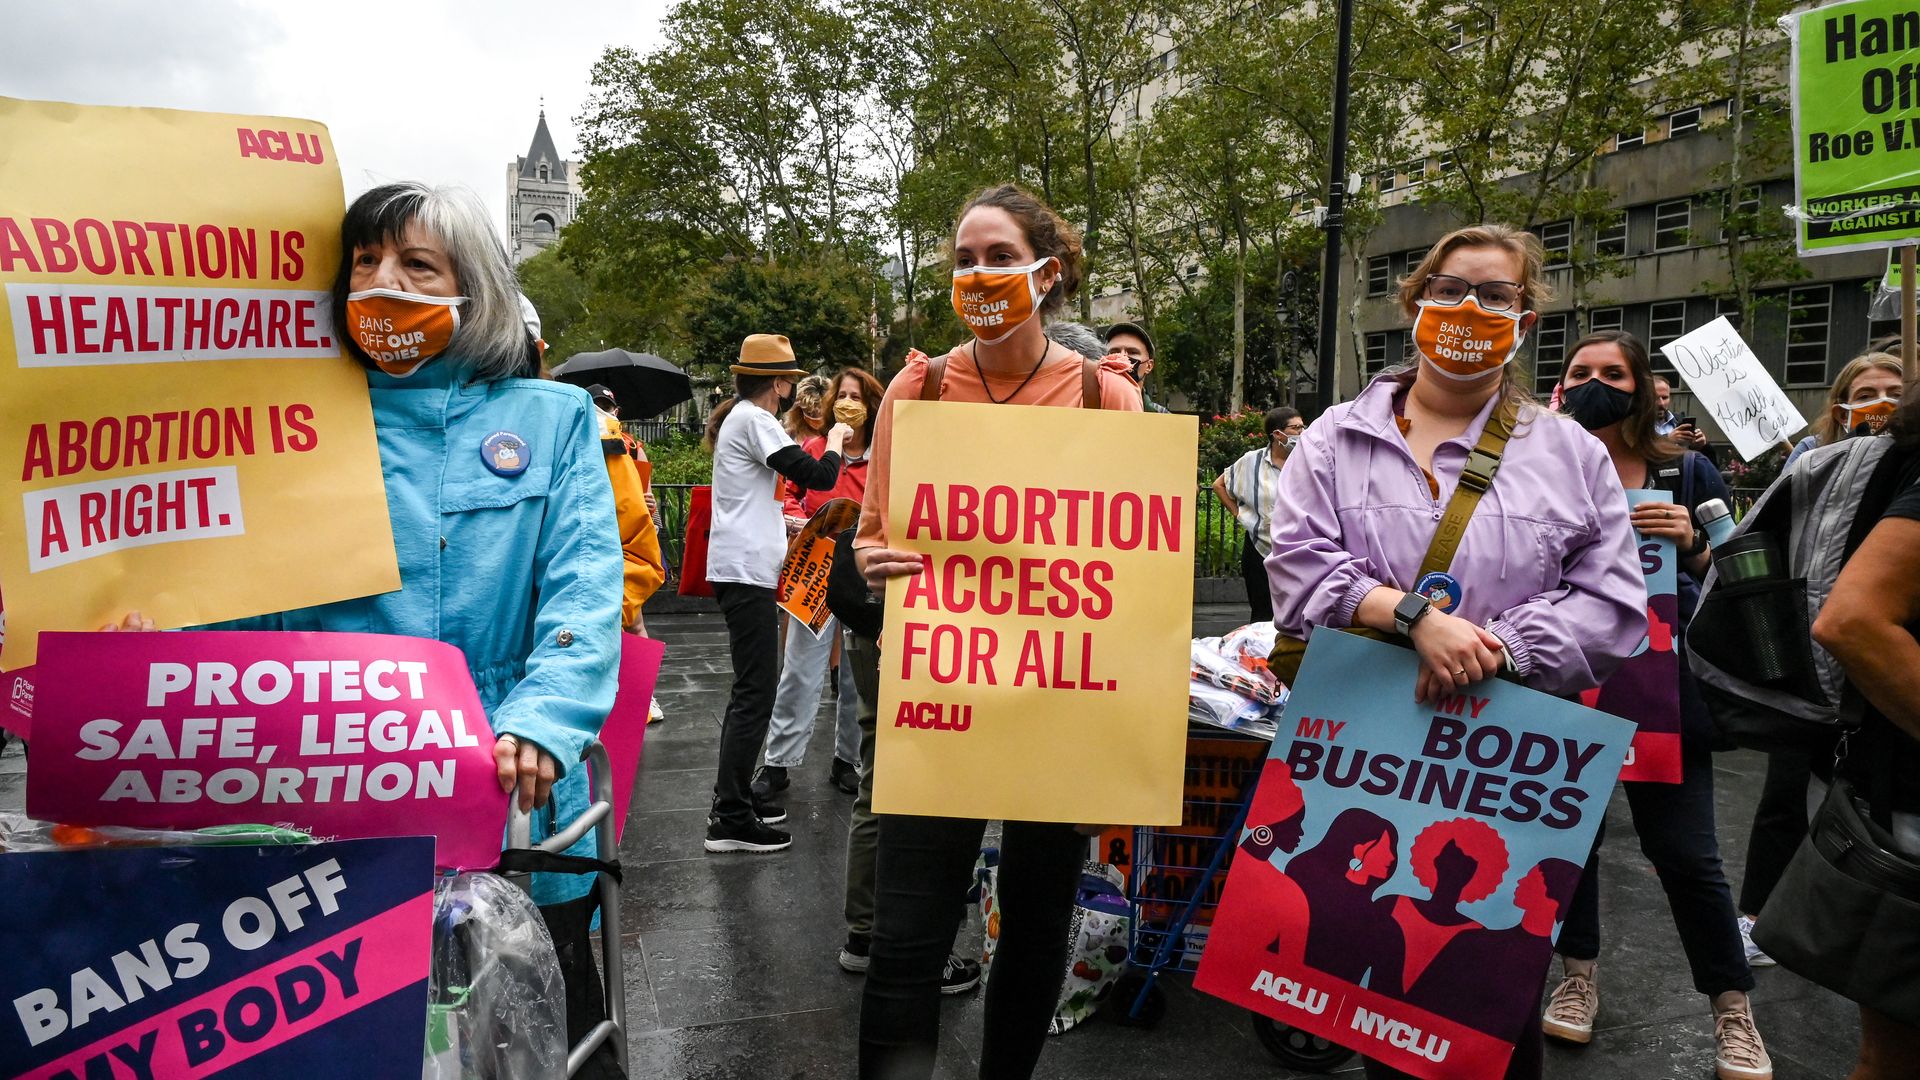 Picture of three women at a pro-choice protest holding signs that say "Abortion access for all."